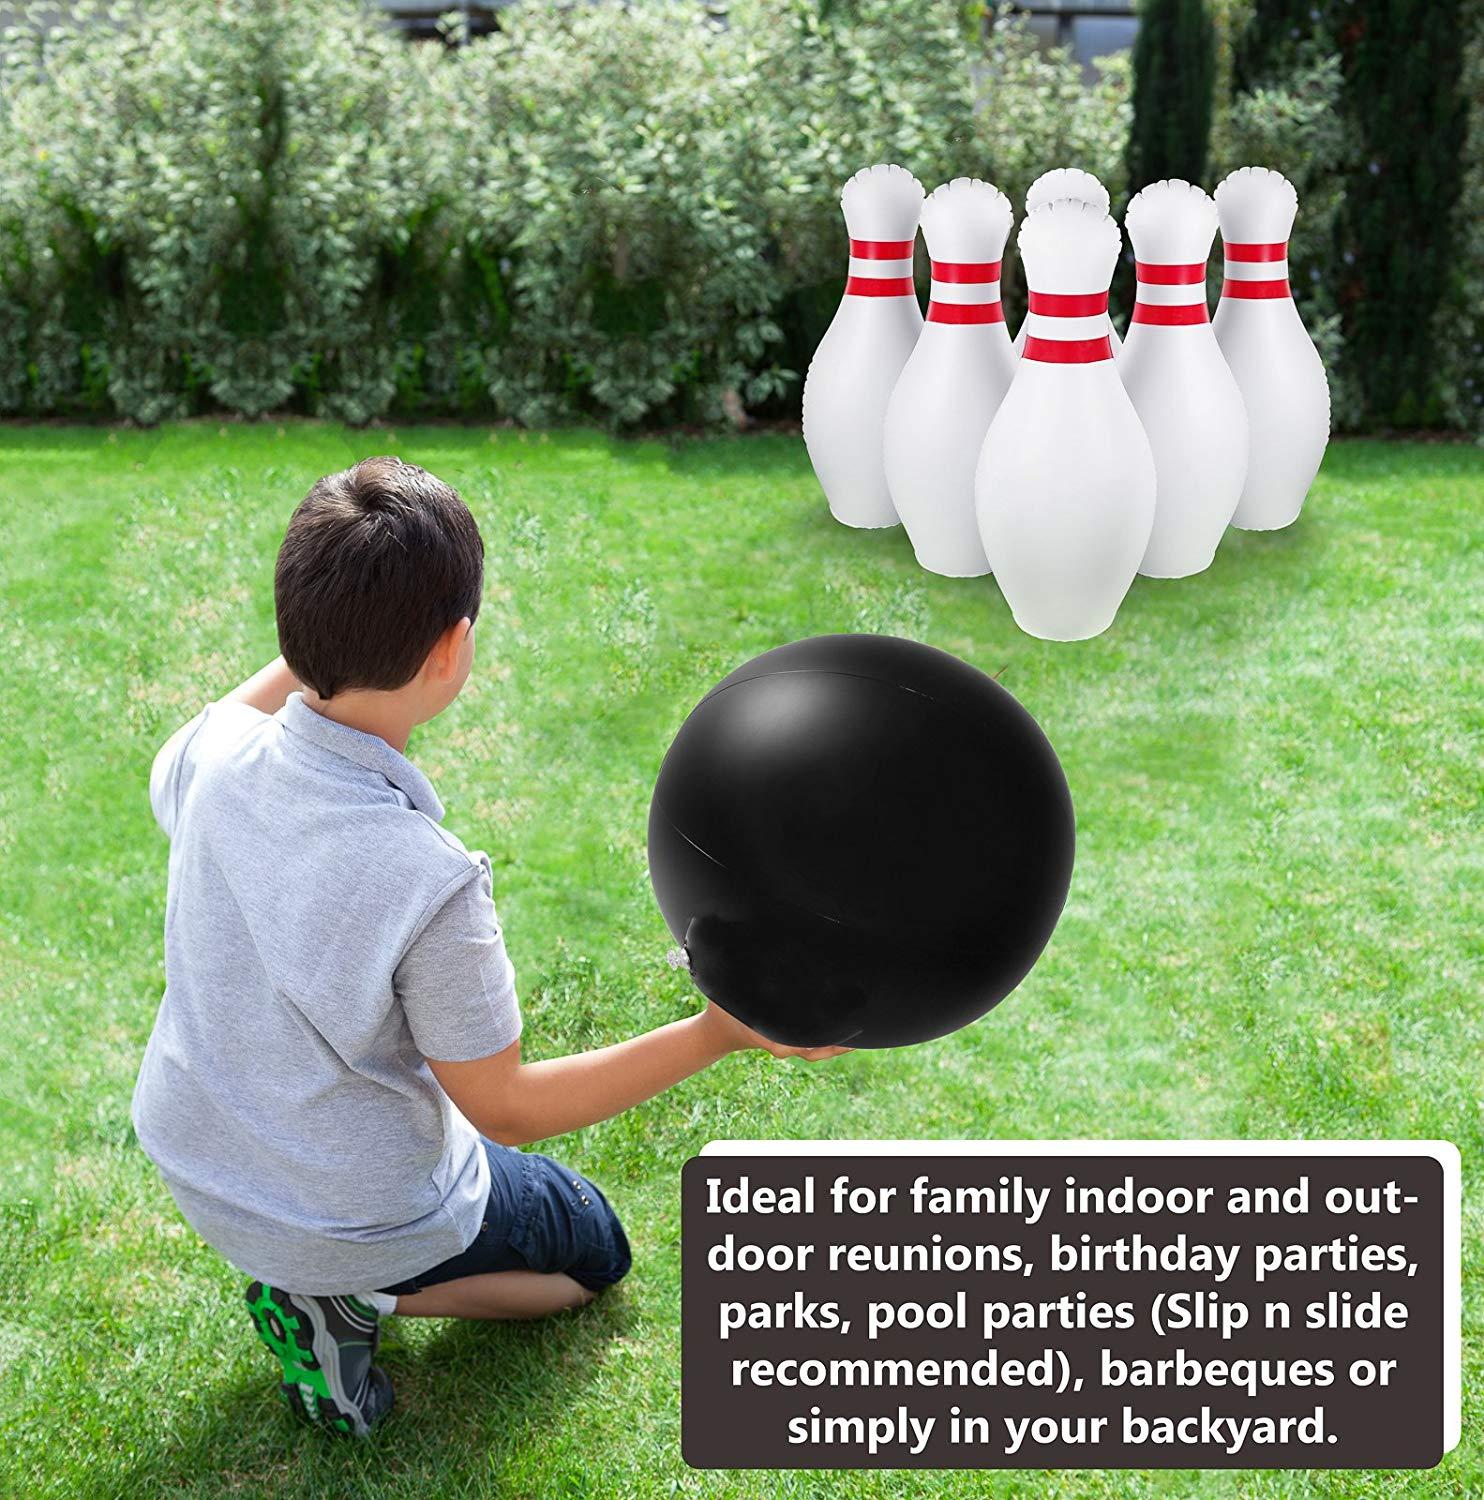 Giant Inflatable Bowling Set for Kids